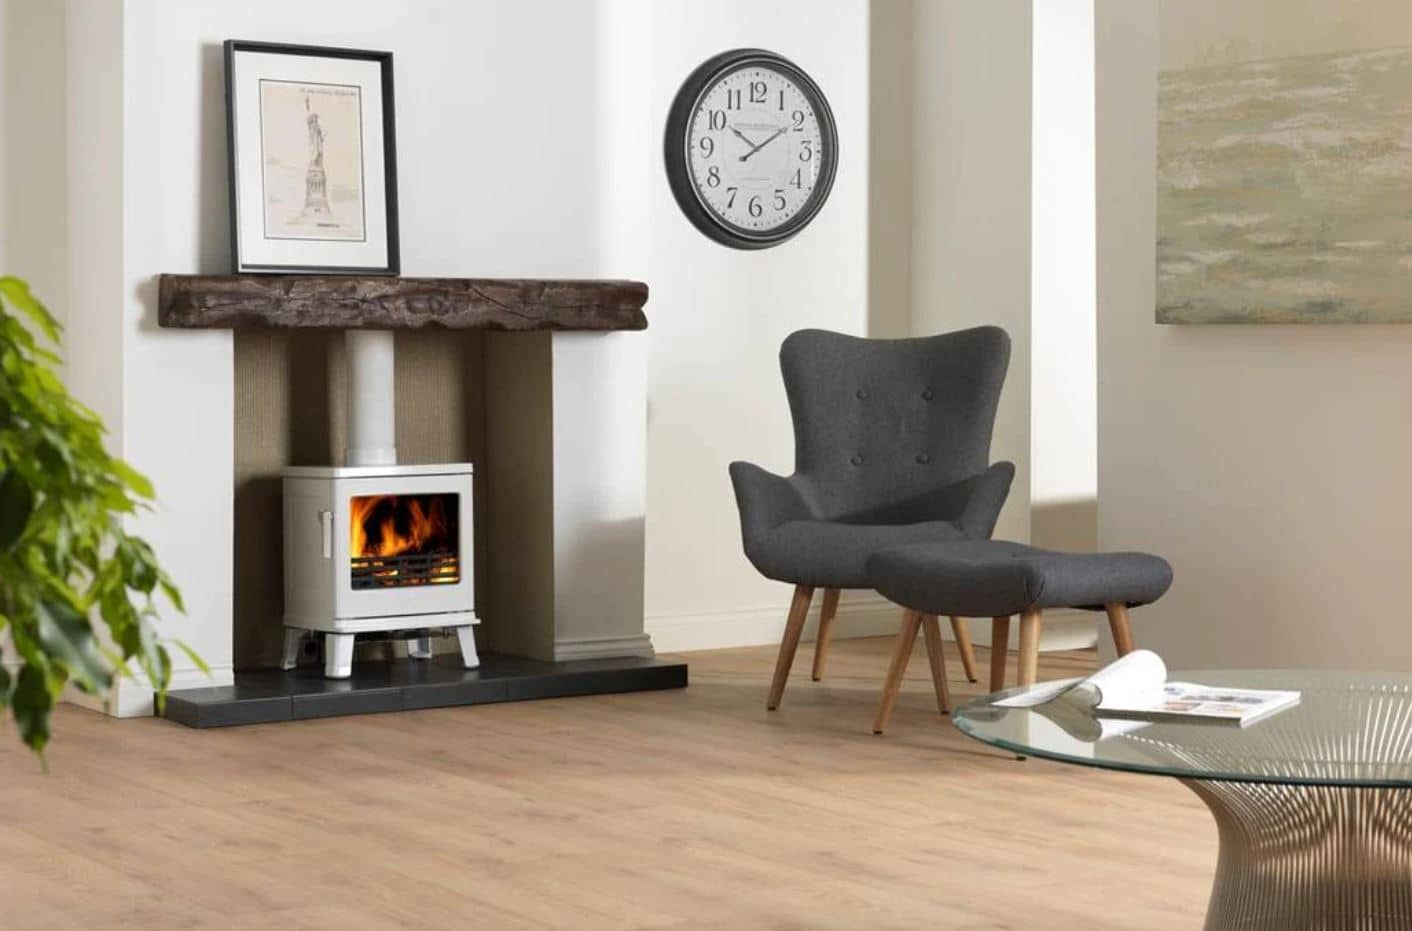 ACR Birchdale Multifuel Stove in living room